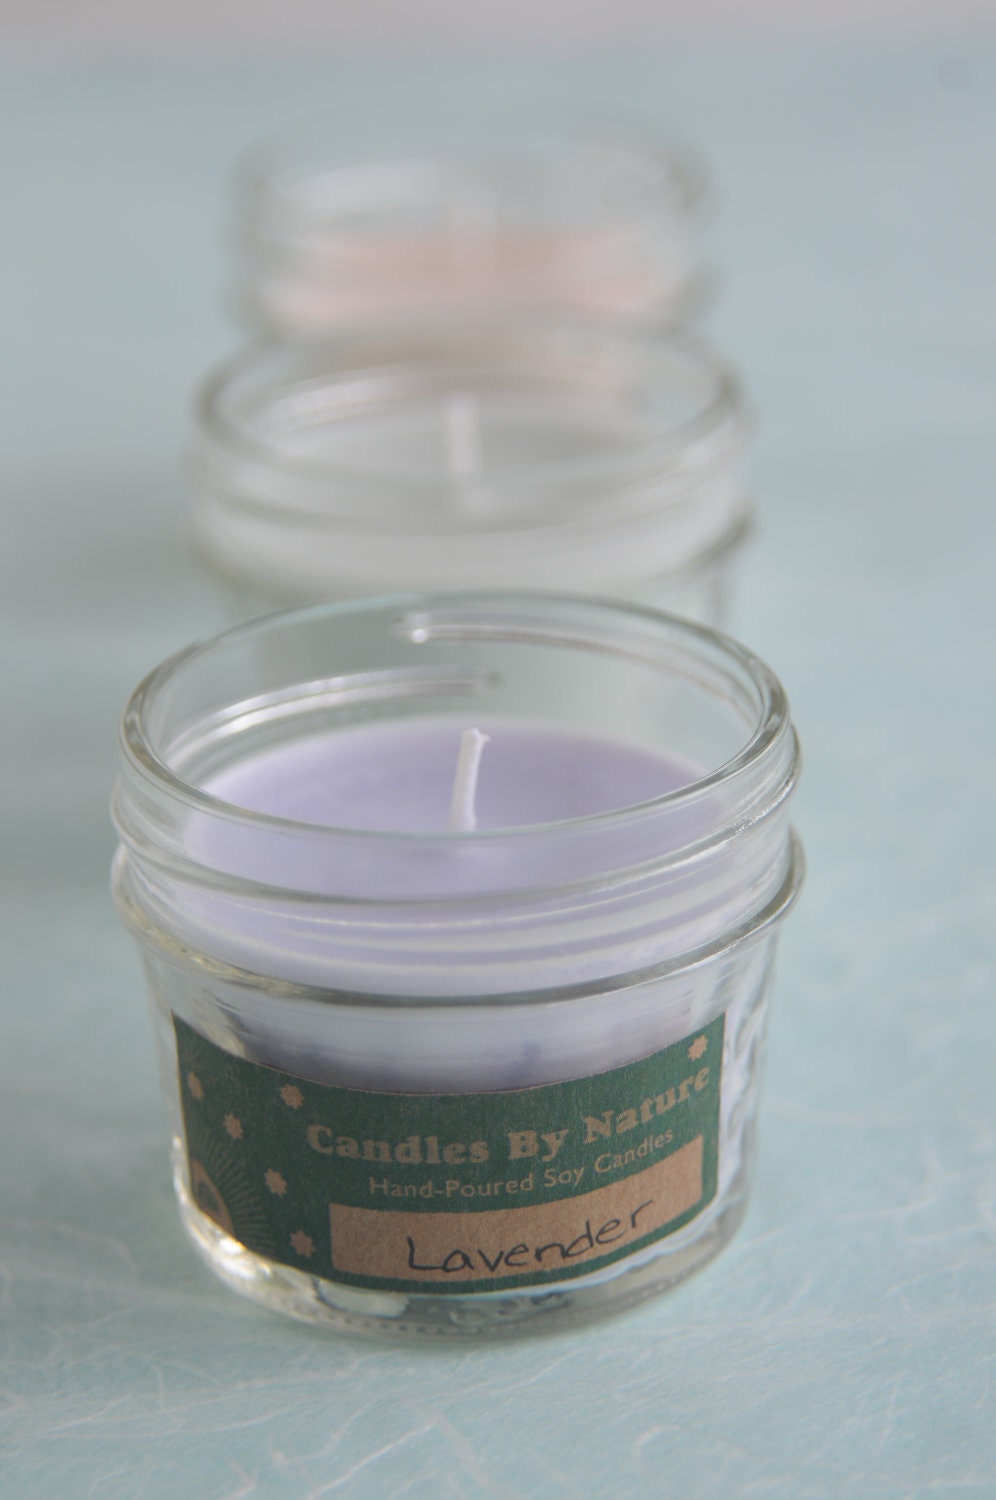 LAVENDER Handcrafted Soy Candle (4 oz.)